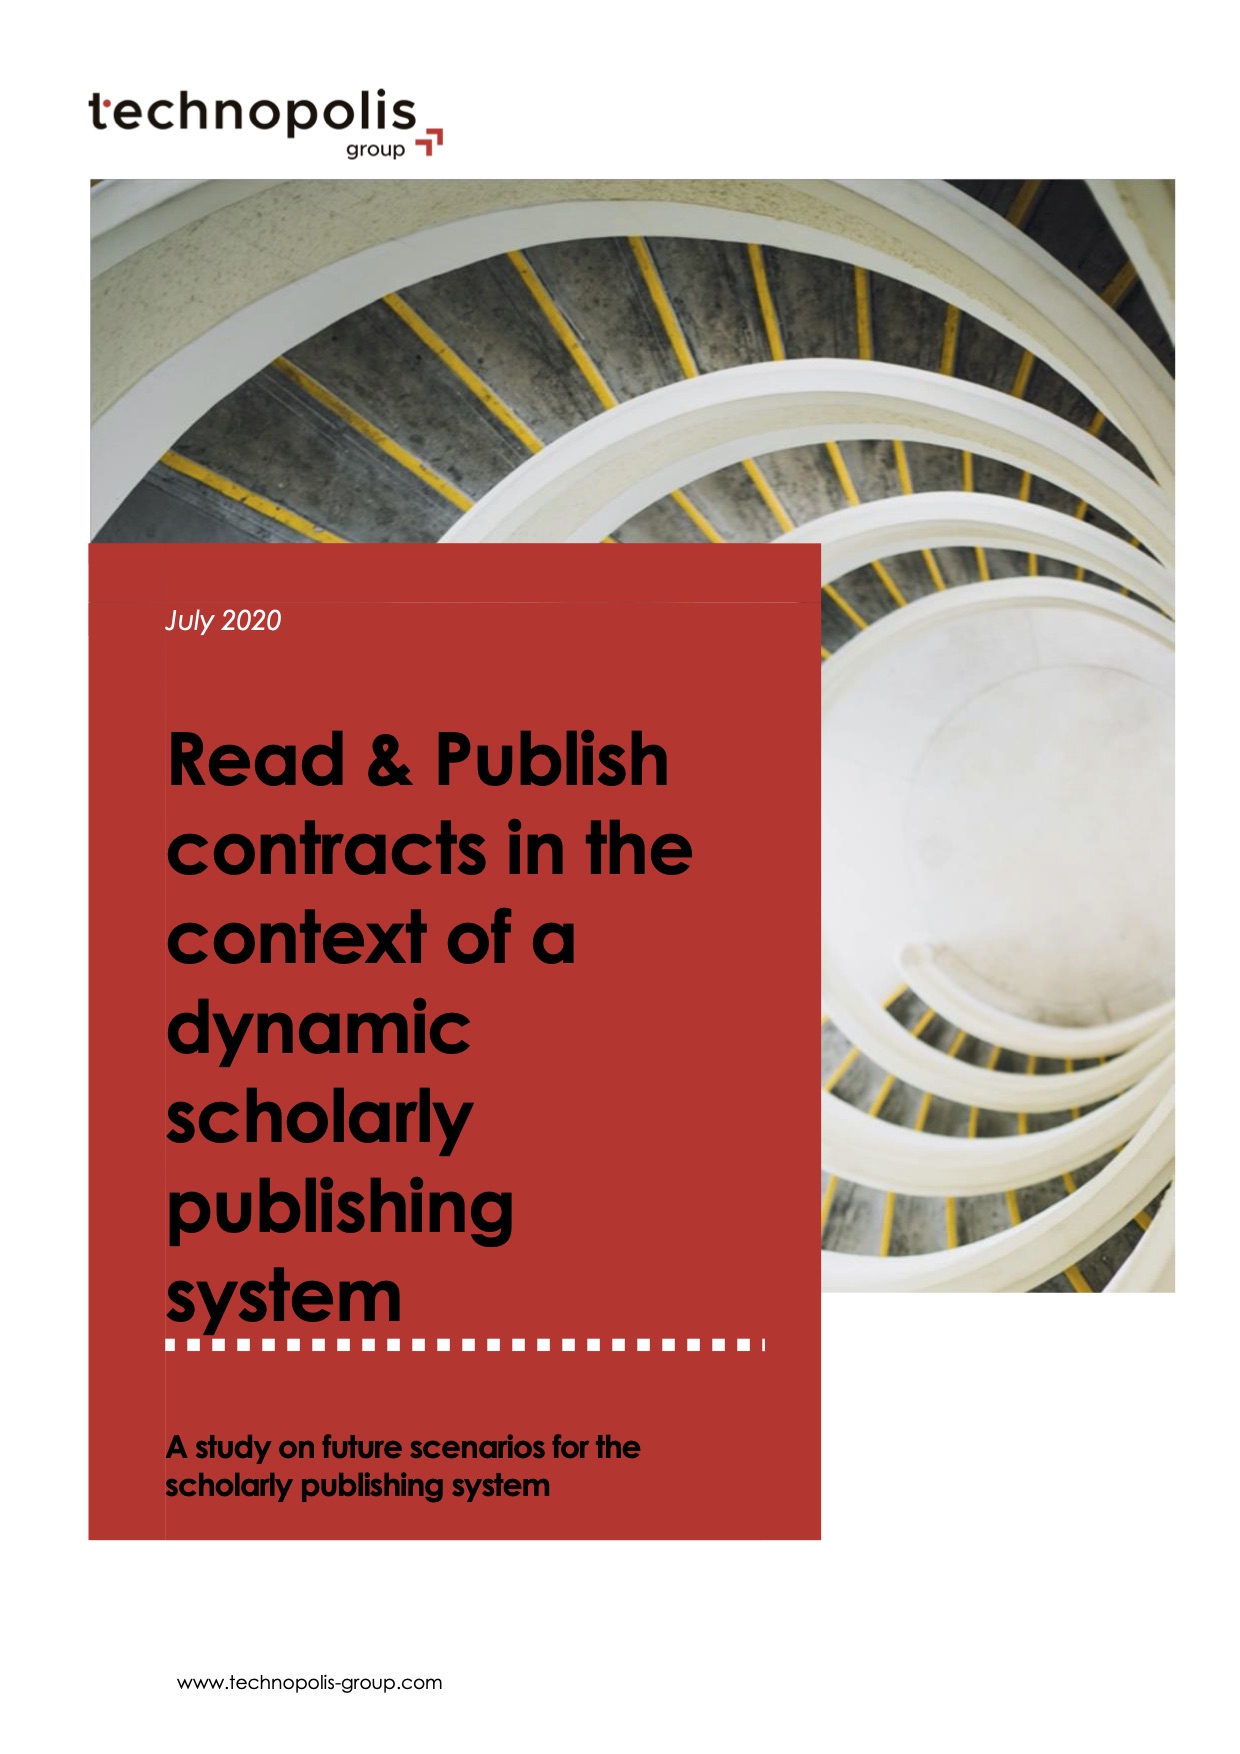 Read & Publish contracts in the context of a dynamic scholarly publishing system